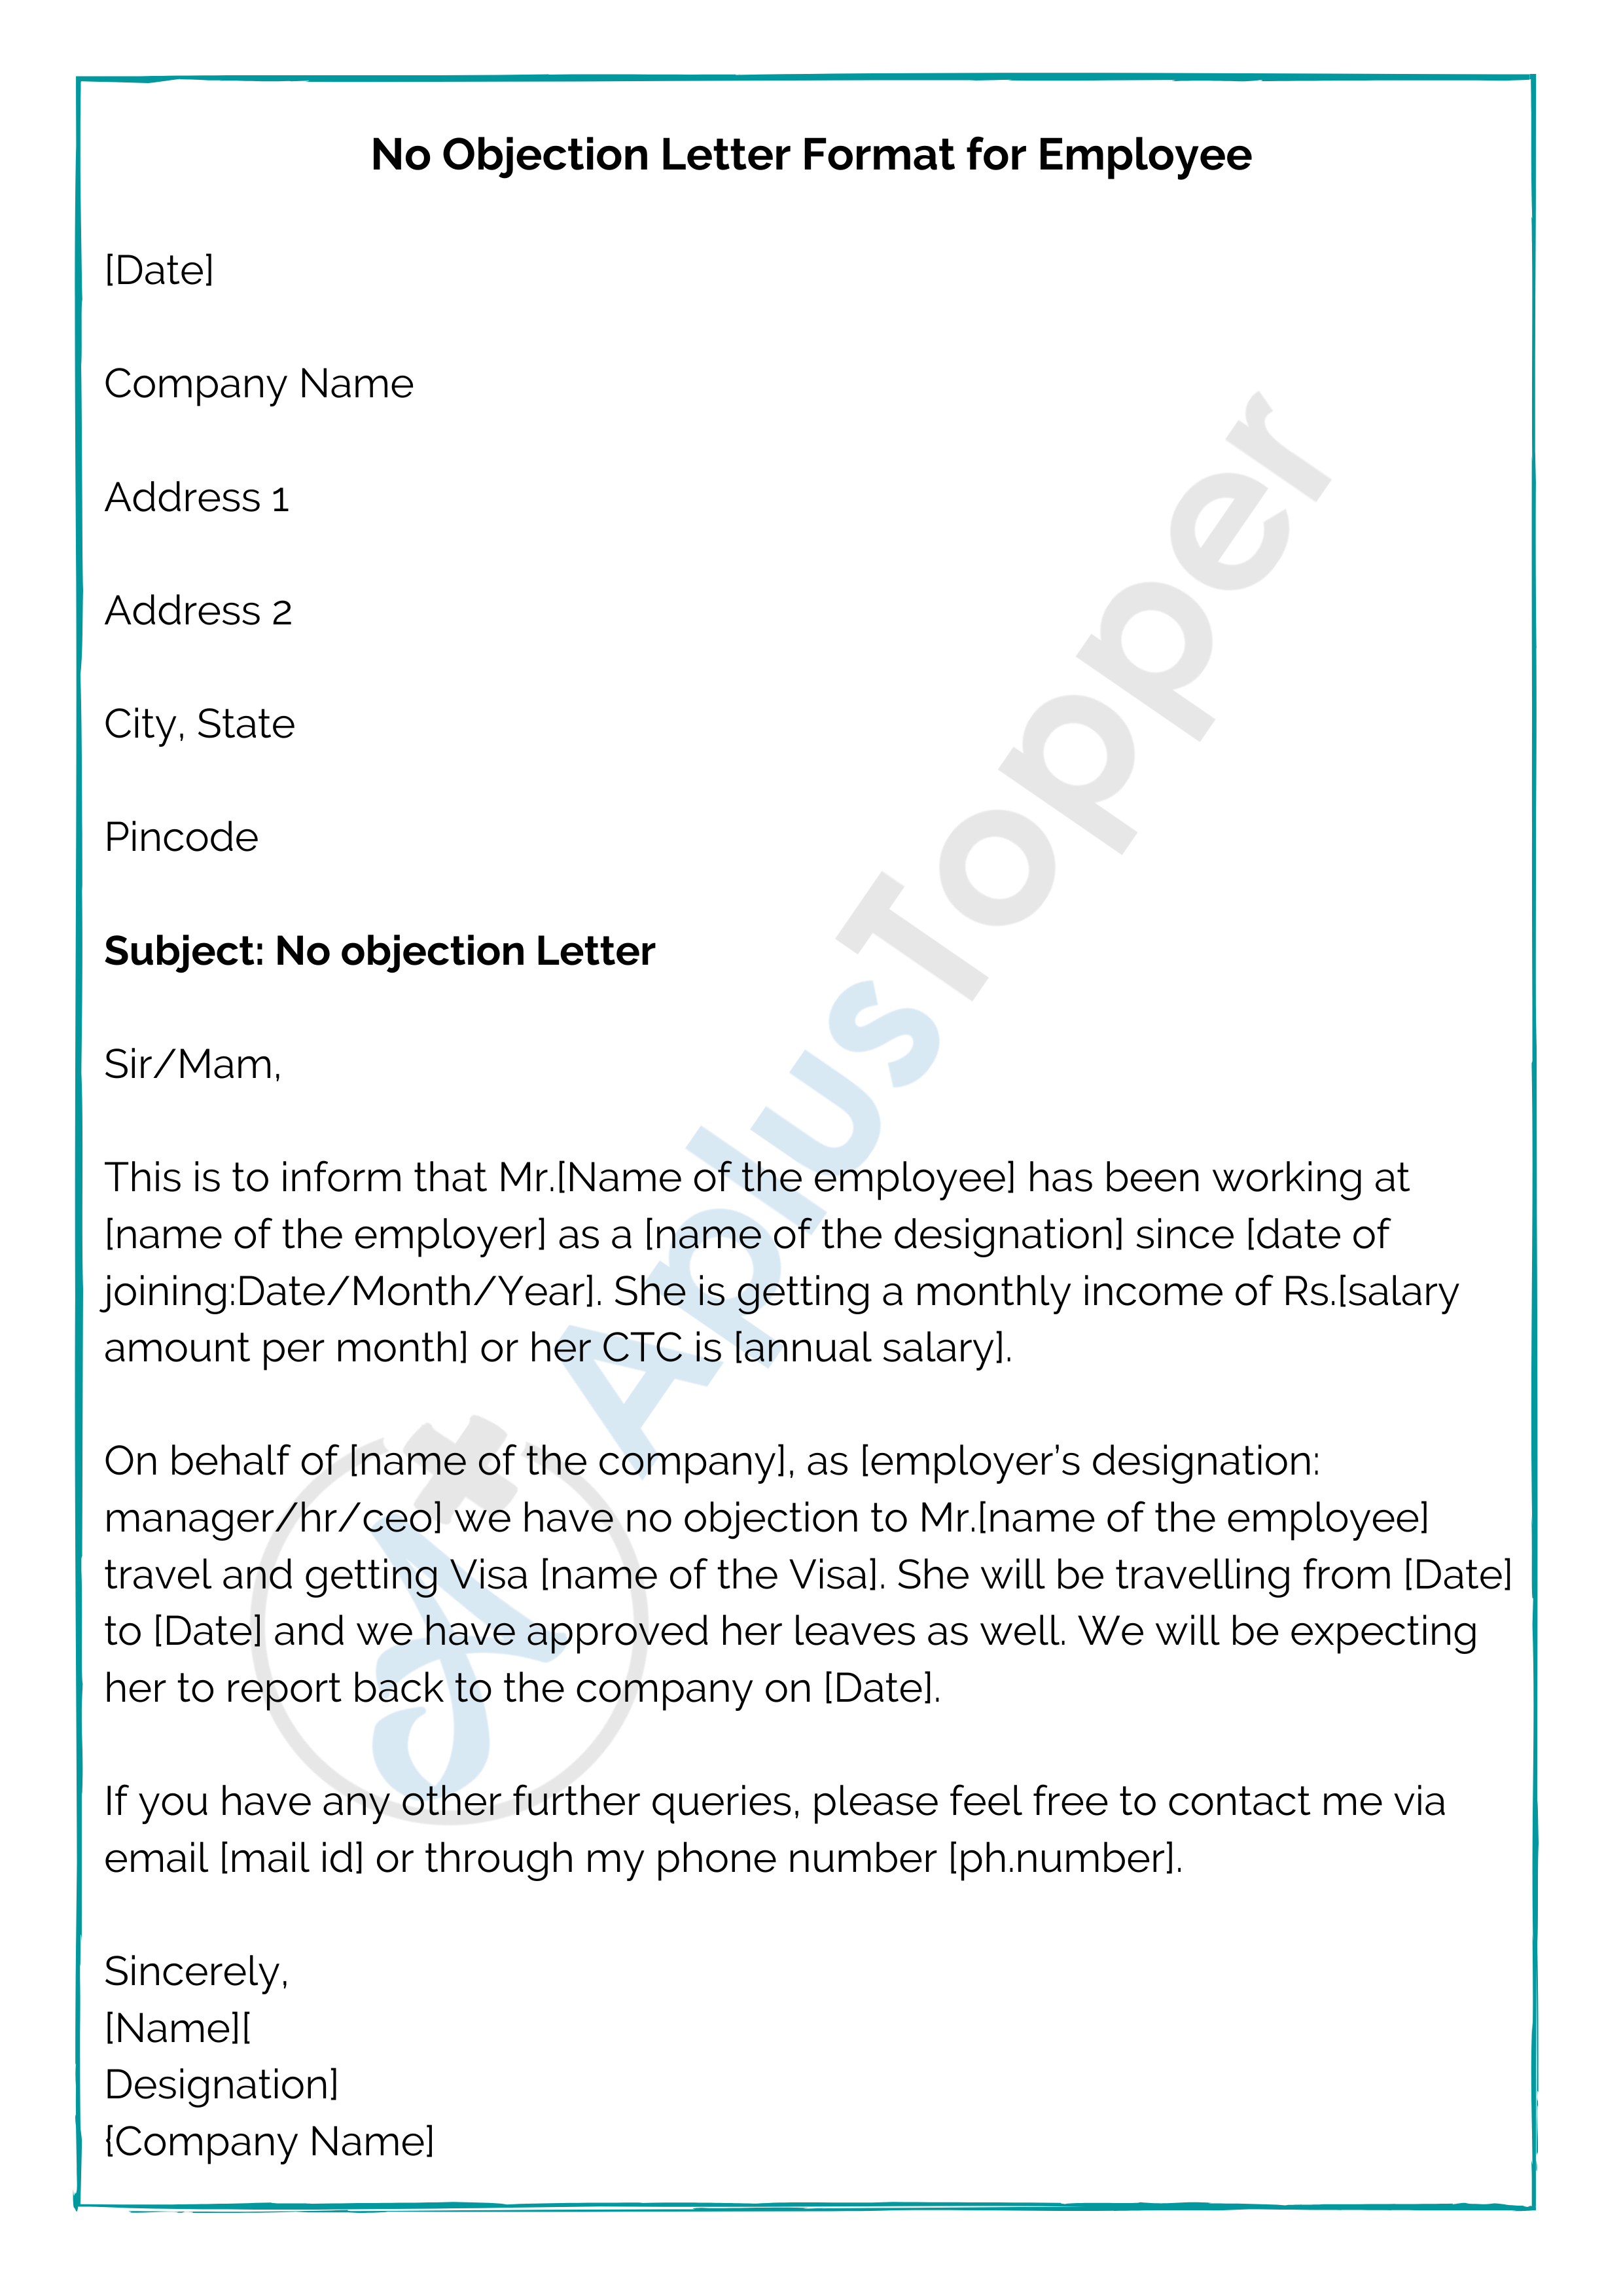 No Objection Letter | Format, Samples, How To Write No Objection Letter? -  A Plus Topper